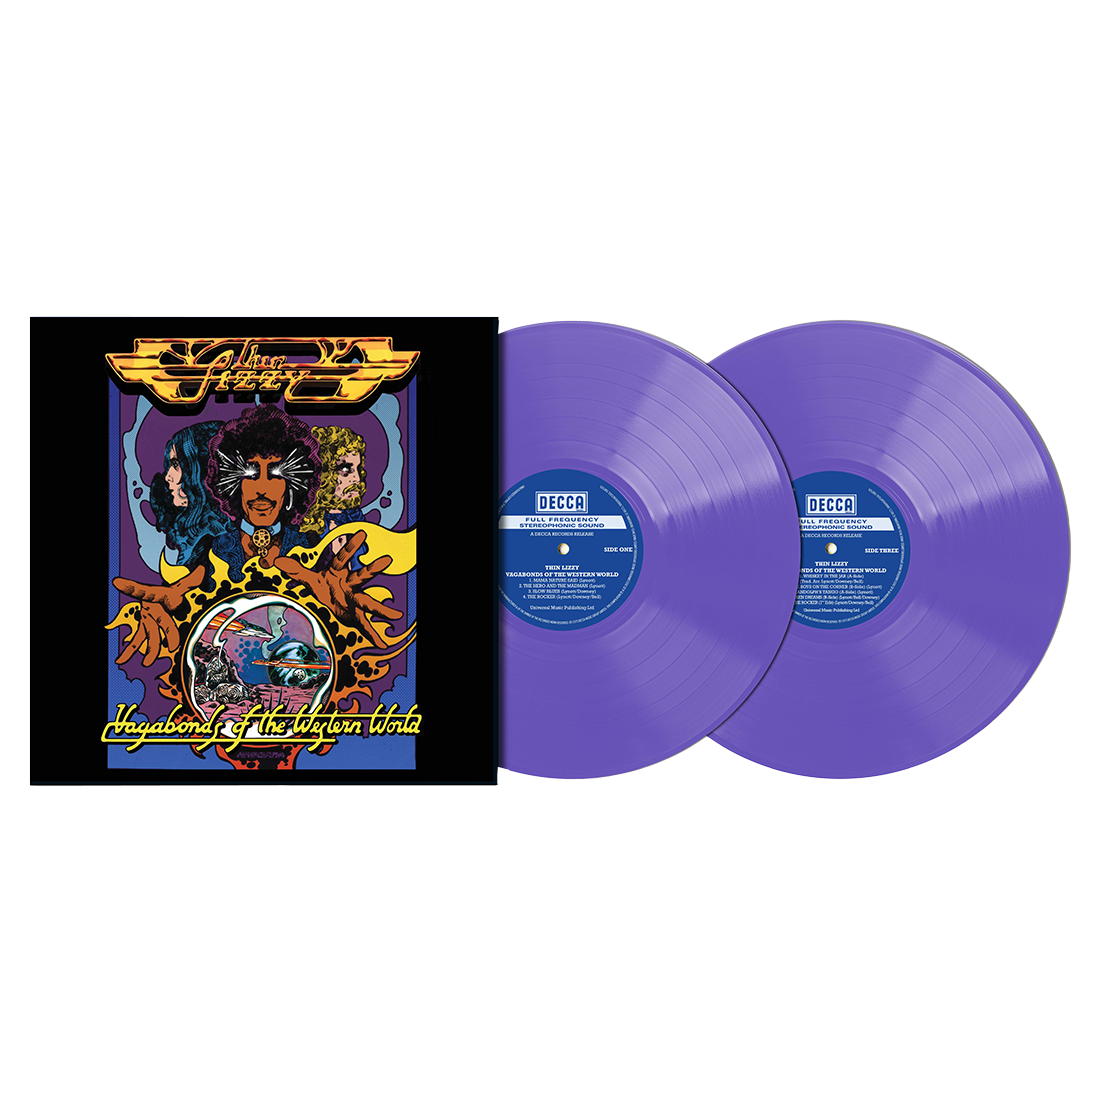 Vagabonds of the Western World: Deluxe Purple Vinyl 2LP, Exclusive Artcard (Signed by Eric Bell) + Jim Fitzpatrick Poster Set